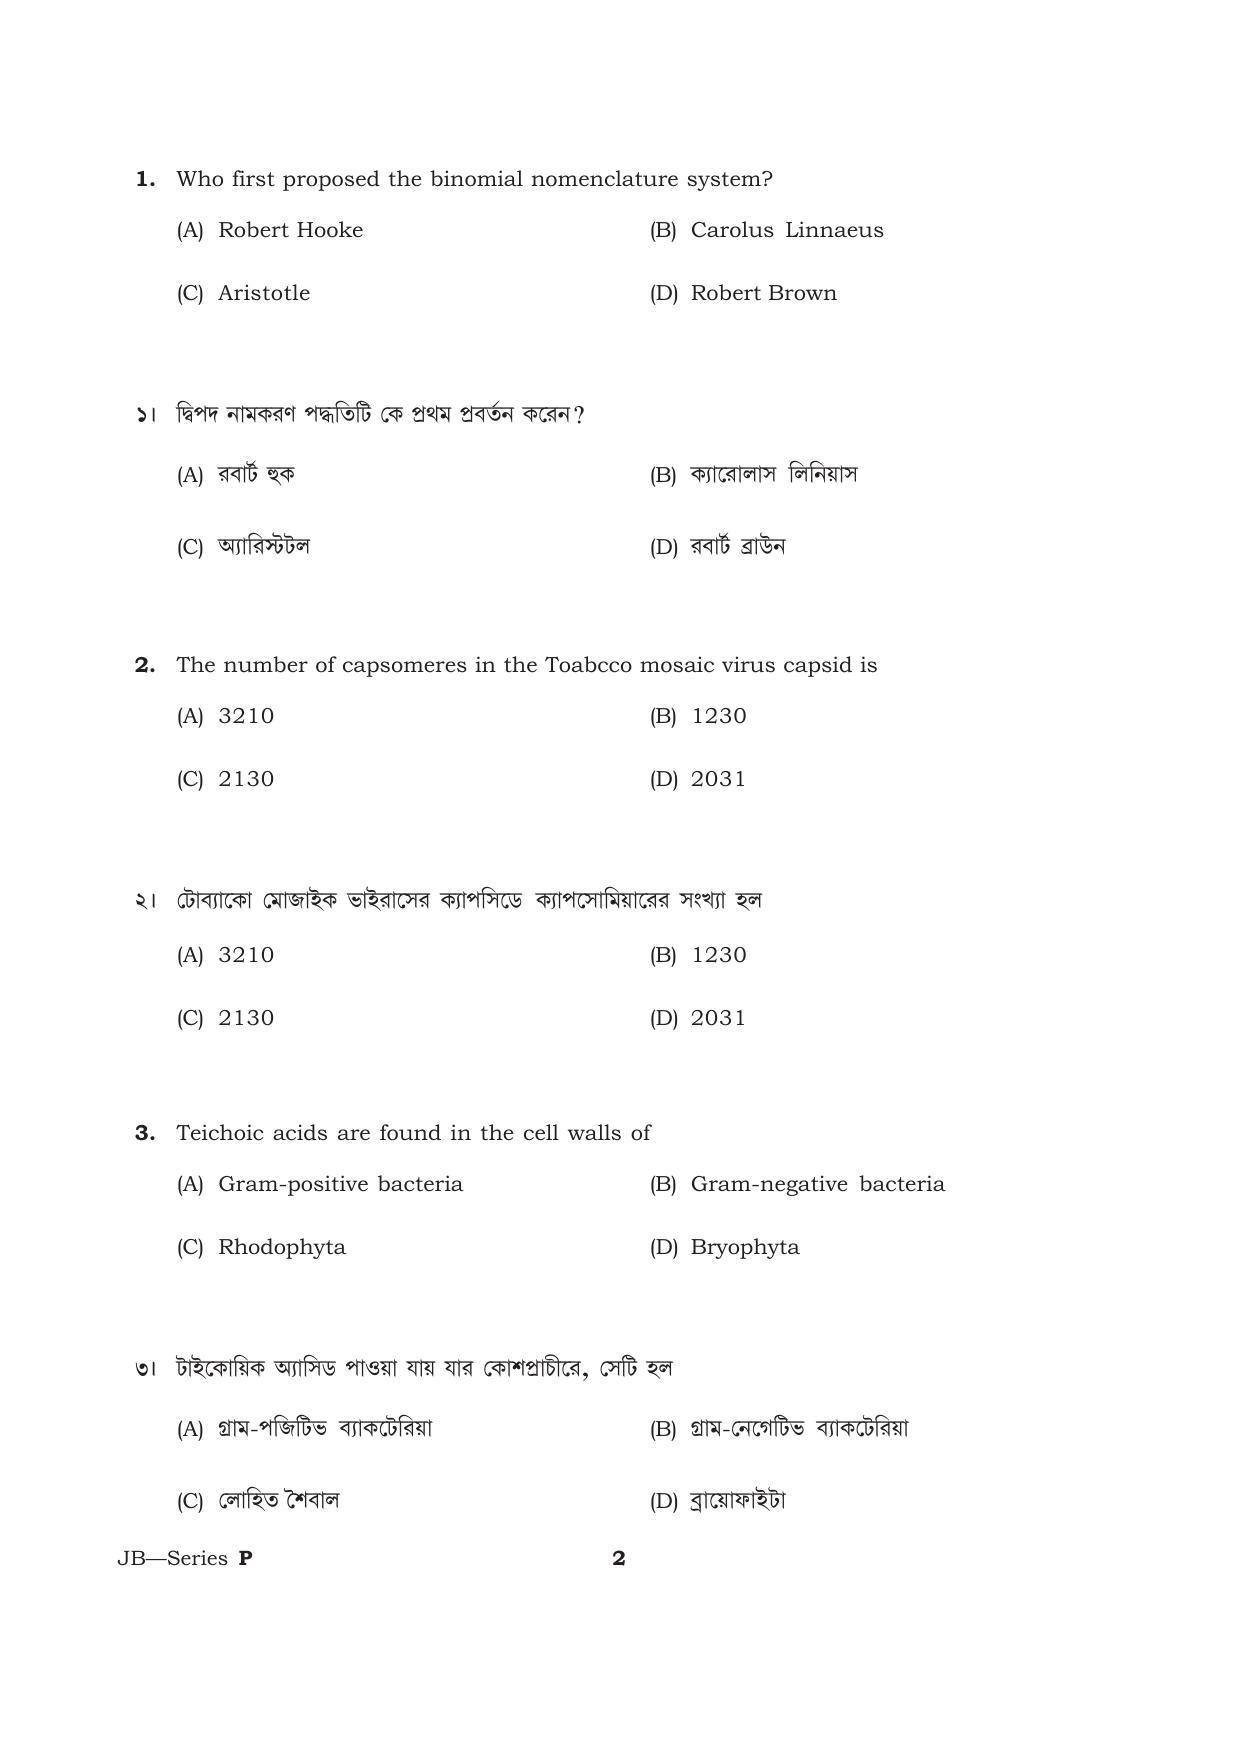 TBJEE Question Paper 2021 - Biology - Page 2